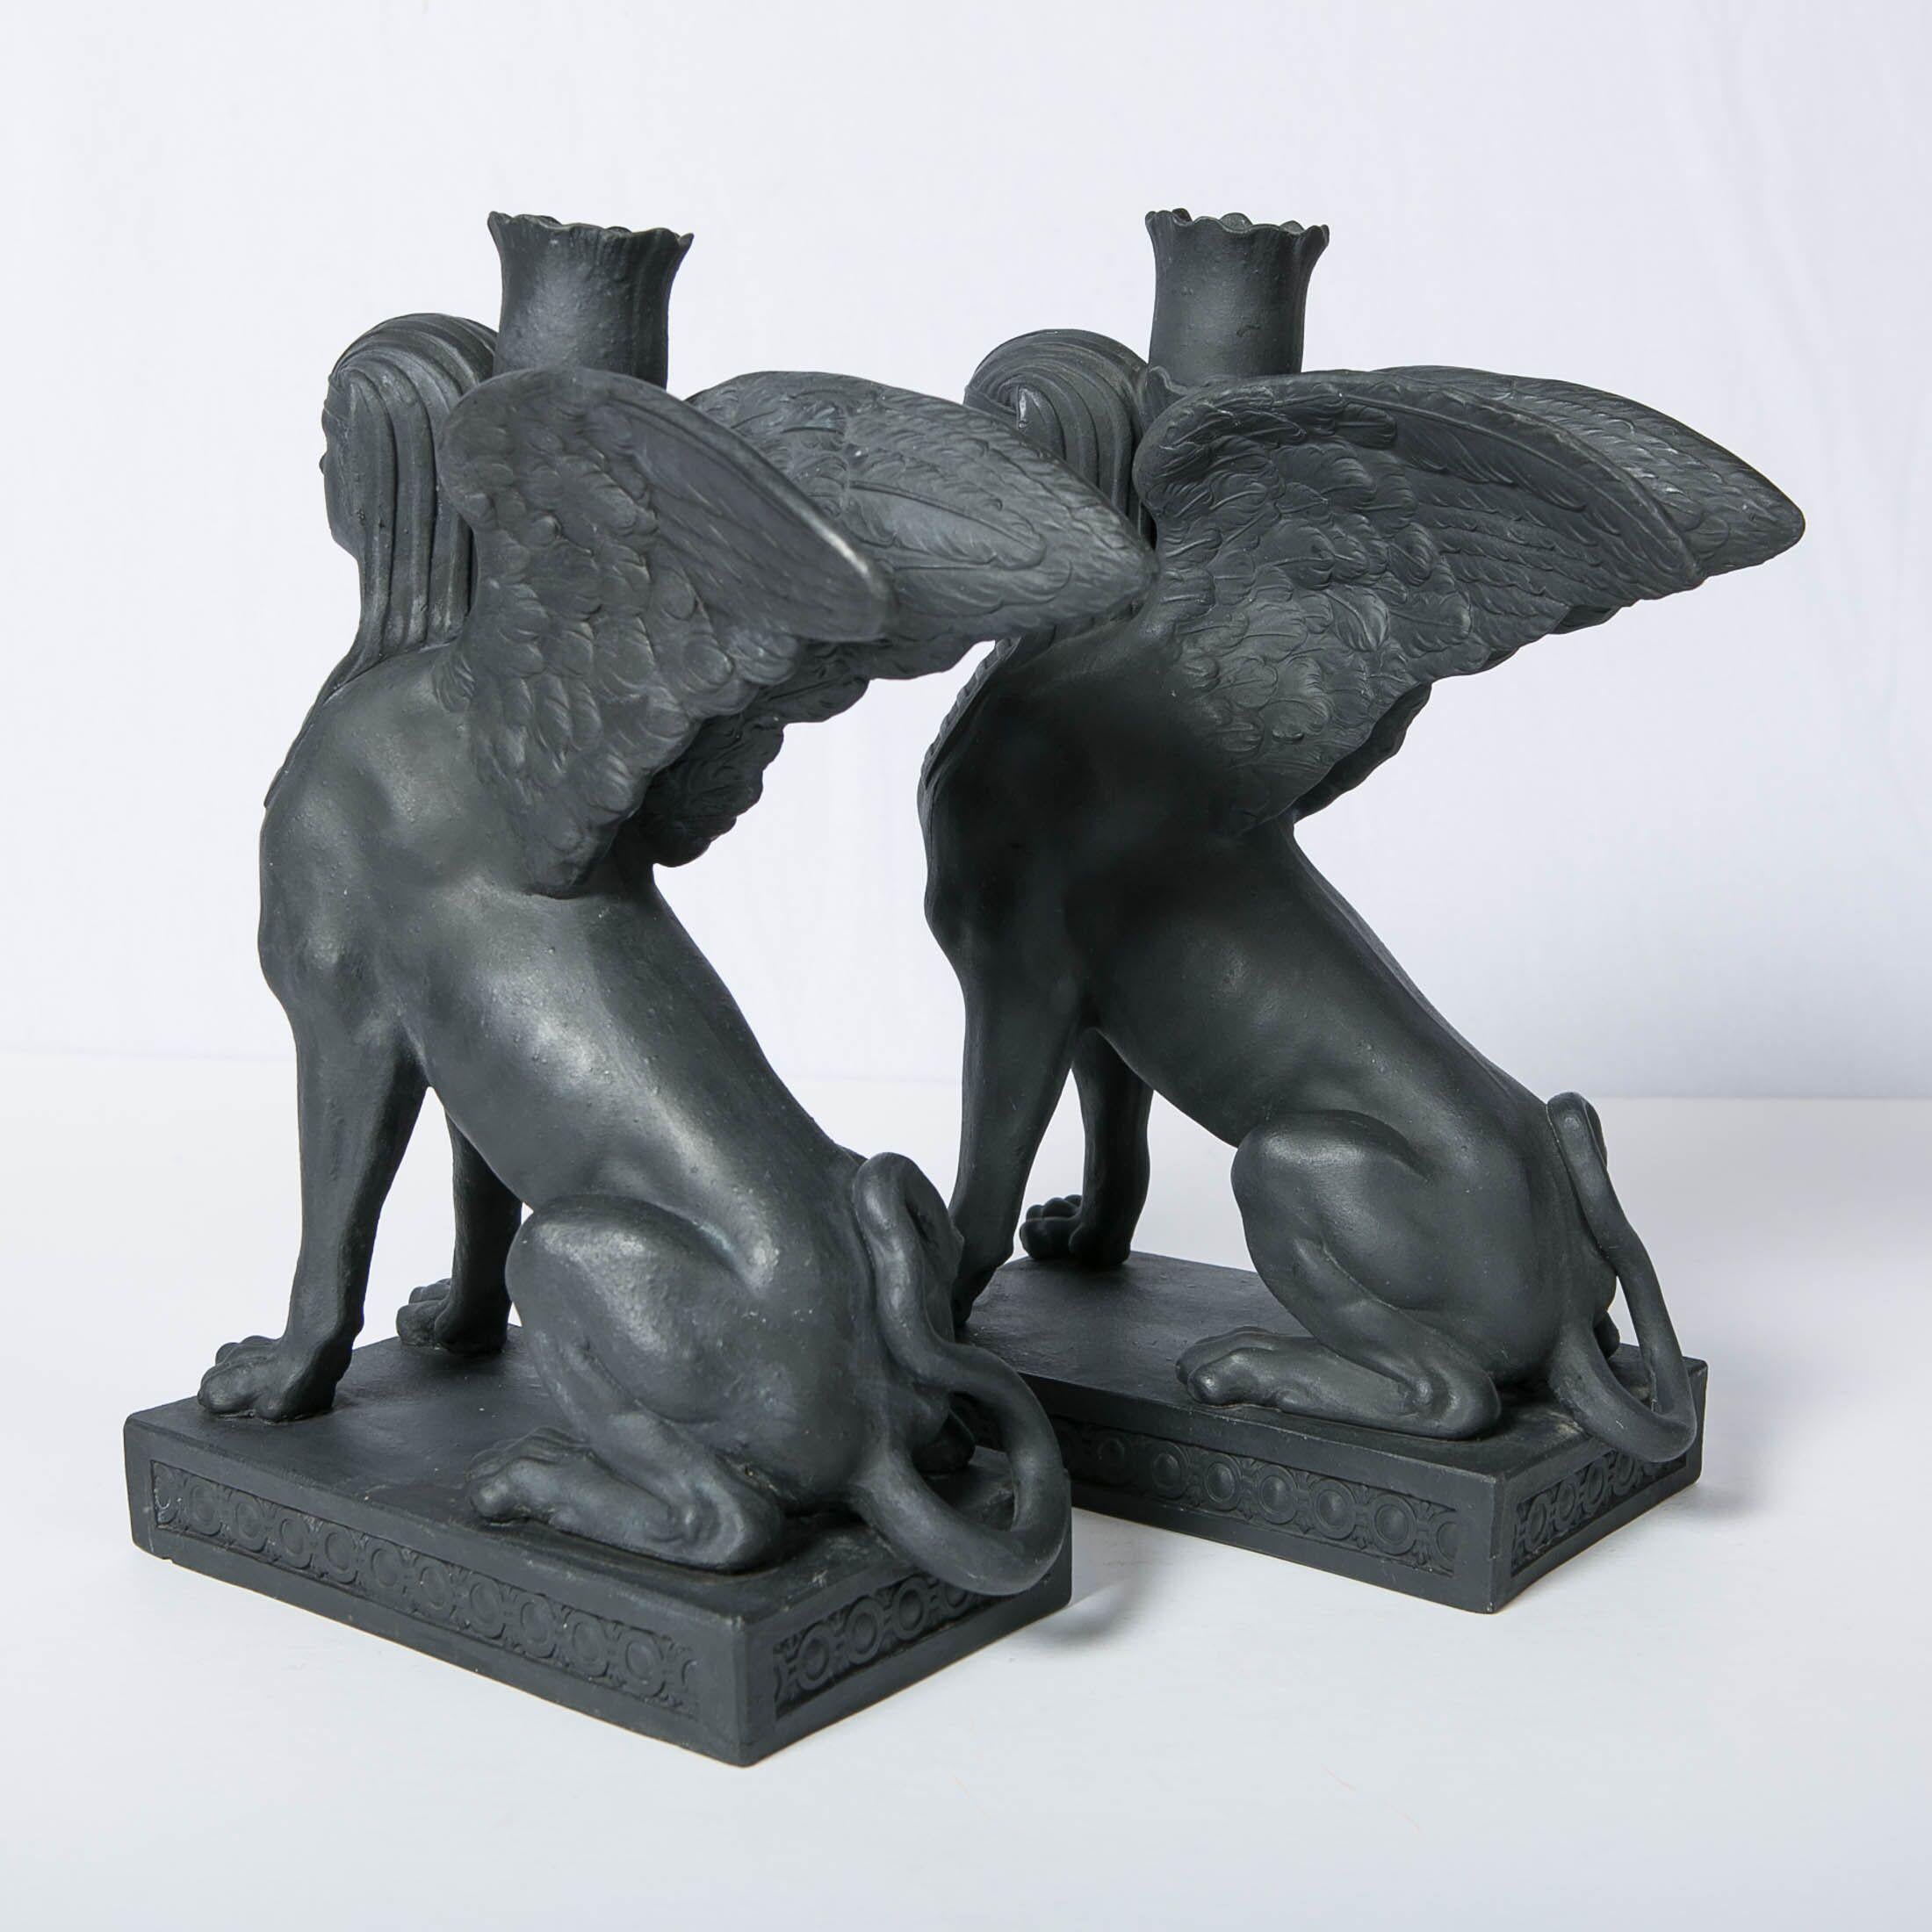 Stoneware Pair Wedgwood Egyptian Revival Black Basalt Sphinxes Made 18th Century, England For Sale